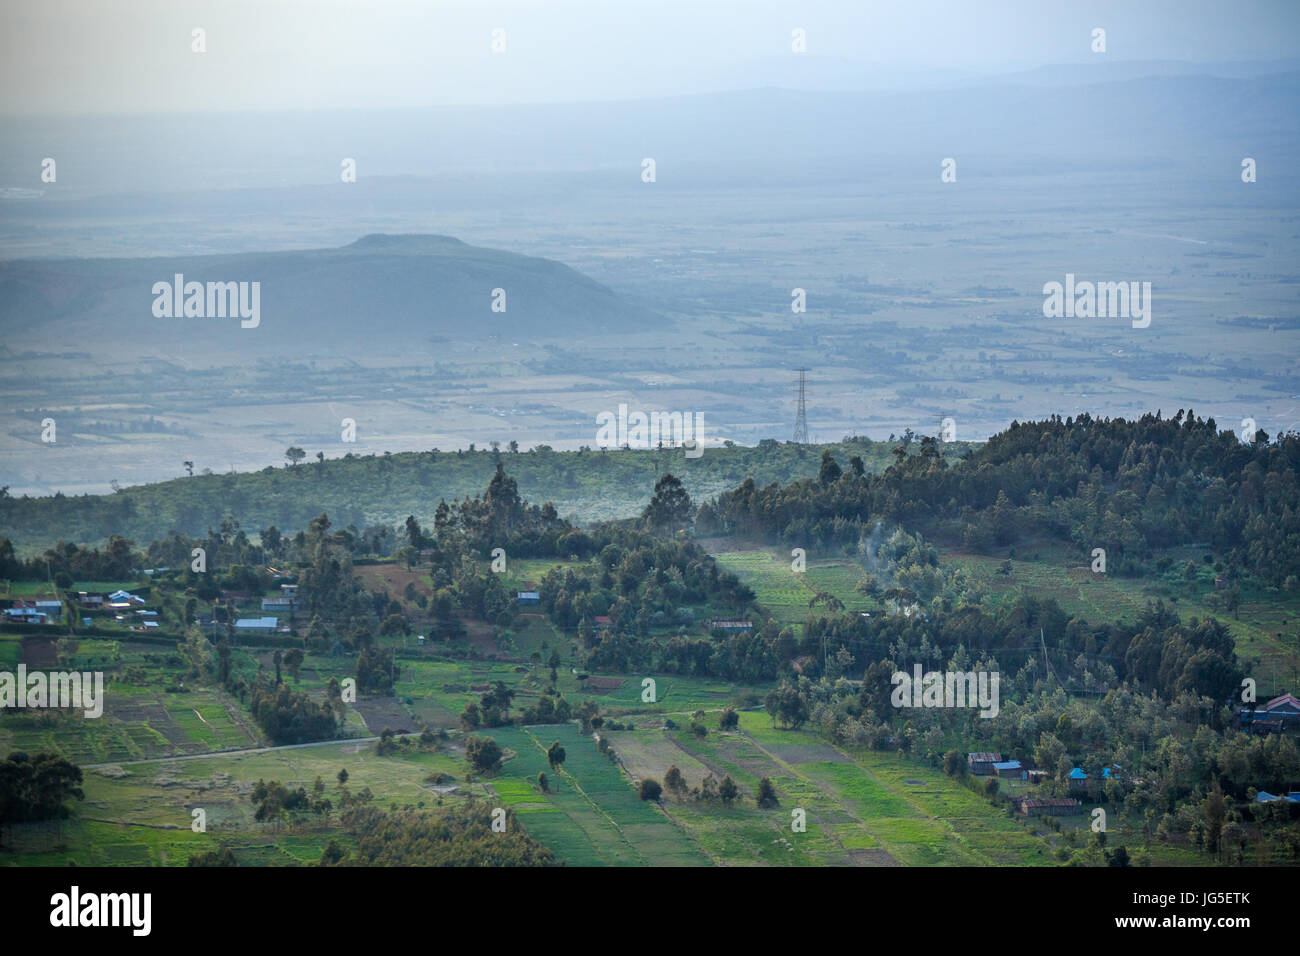 Great Rift Valley landscape taken from Mouse Summit, Kenya Stock Photo